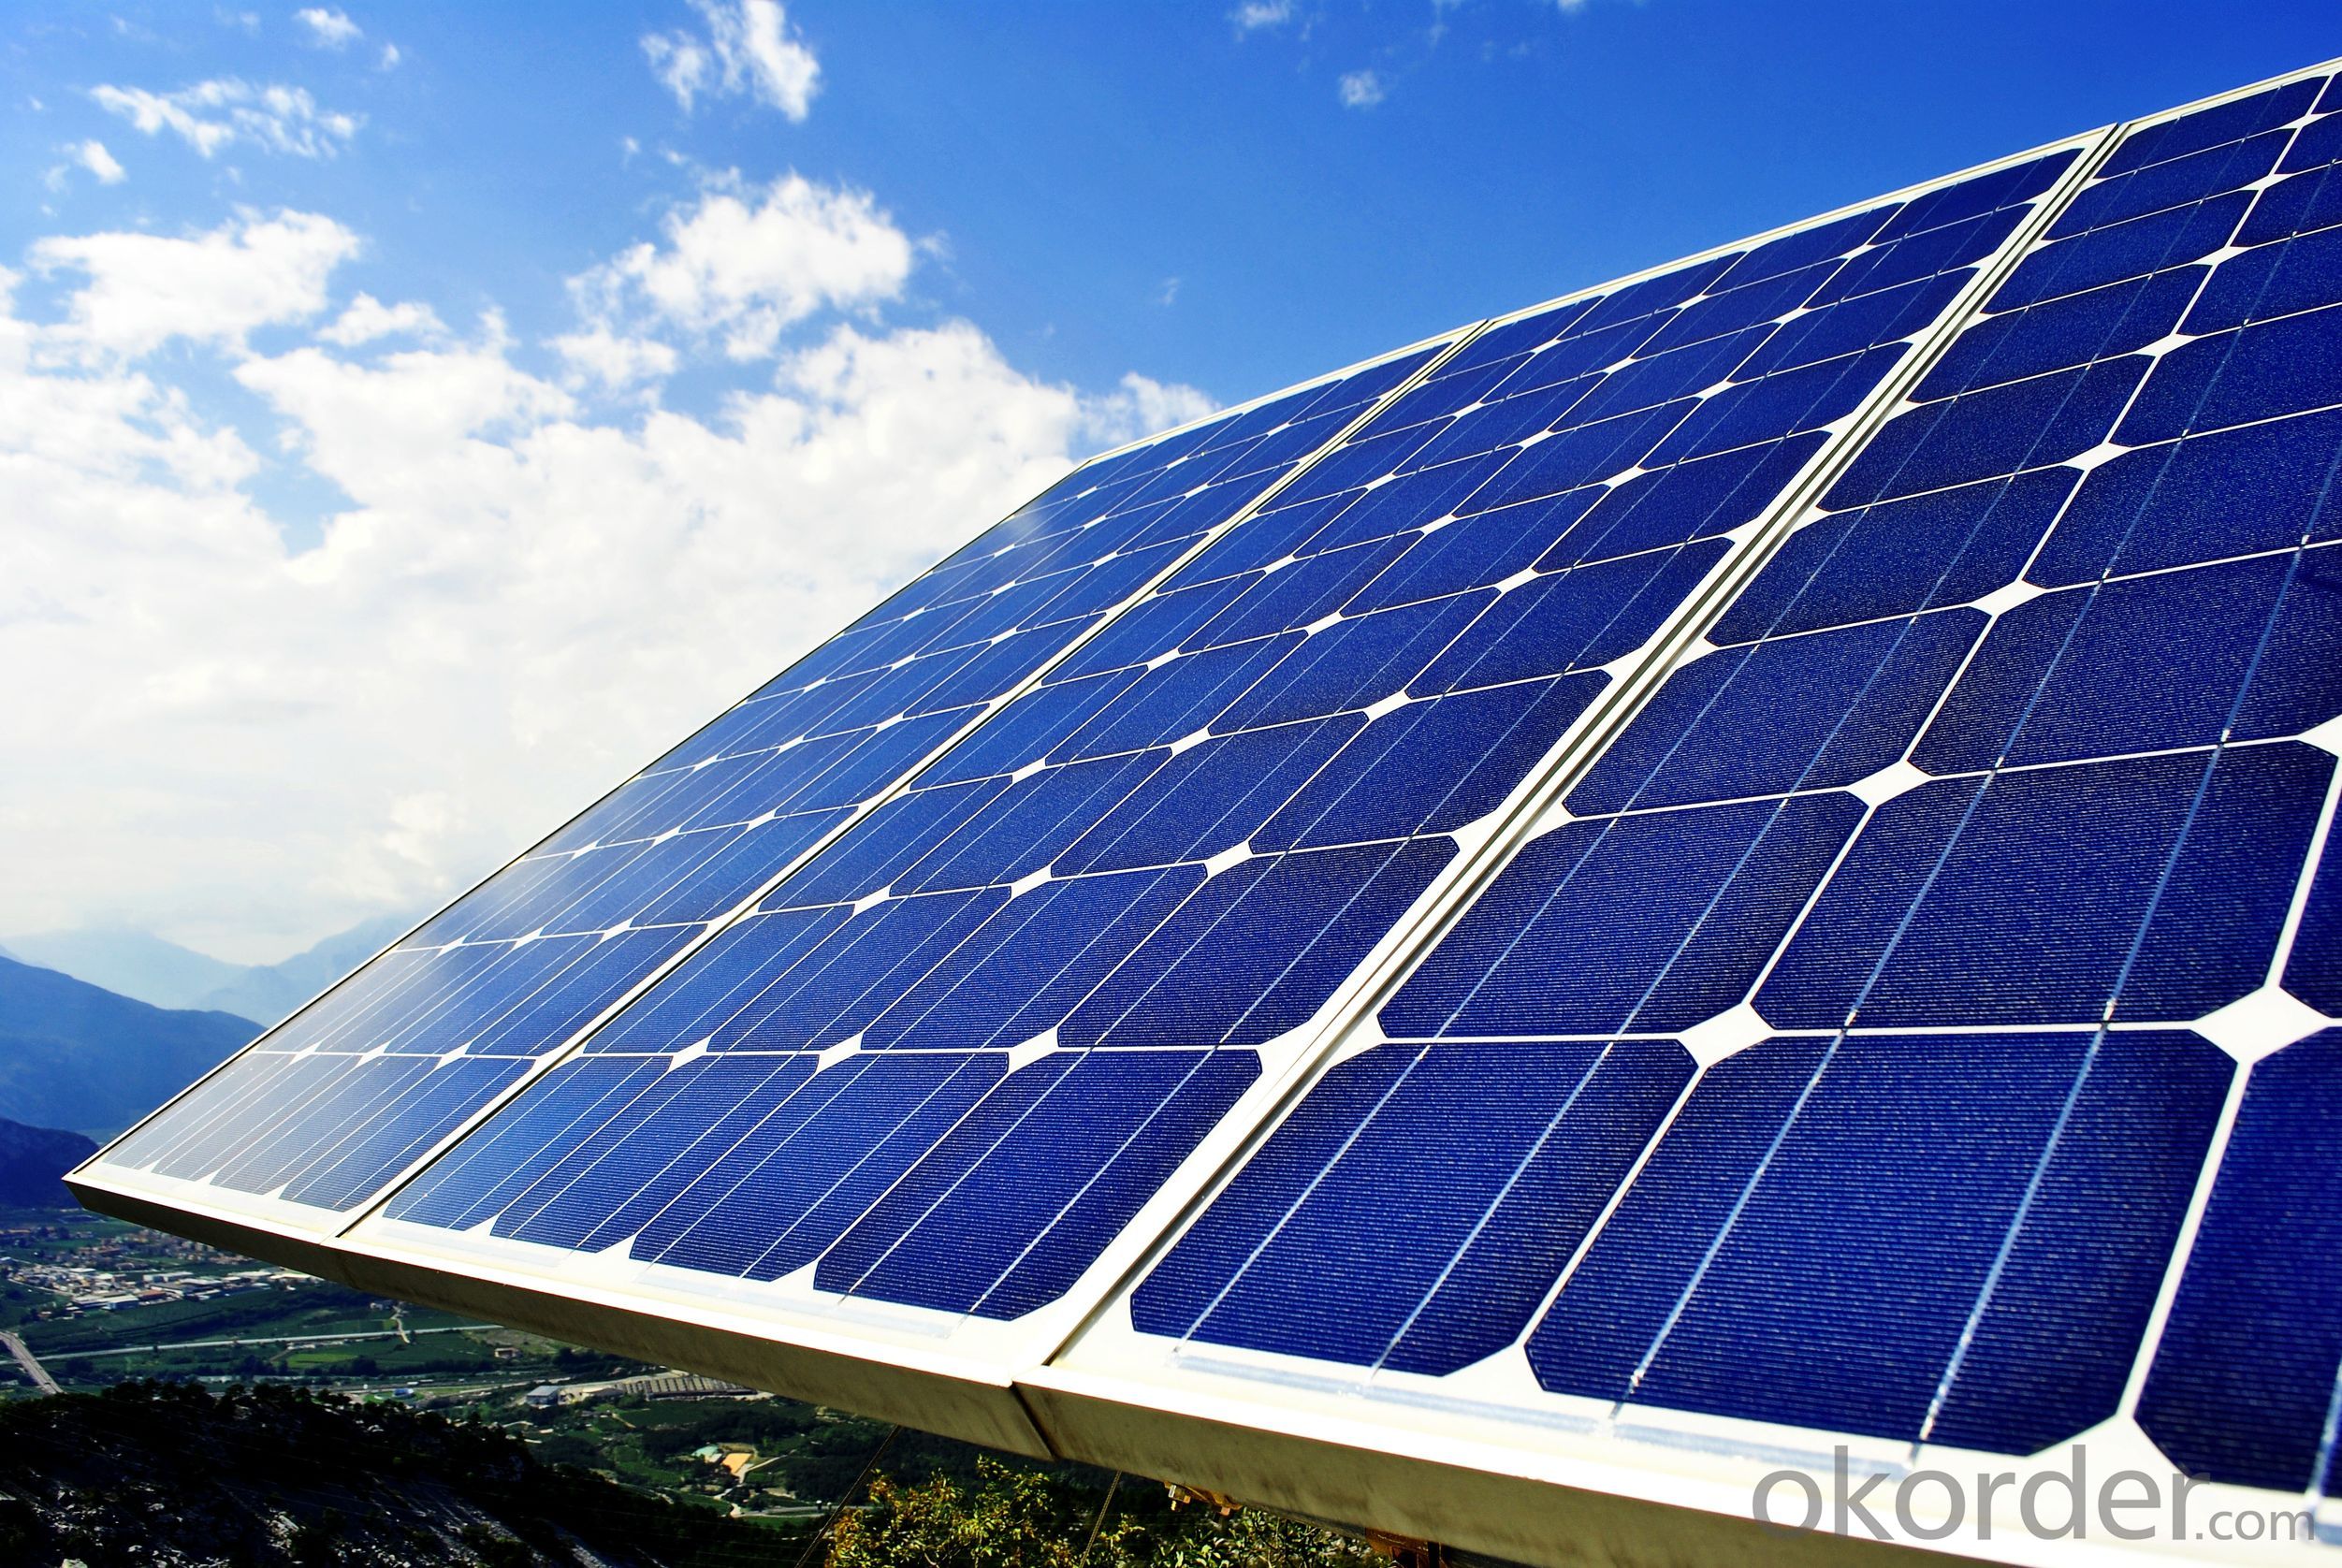 Solar Panels with High Quality and Efficiency Mono 290W